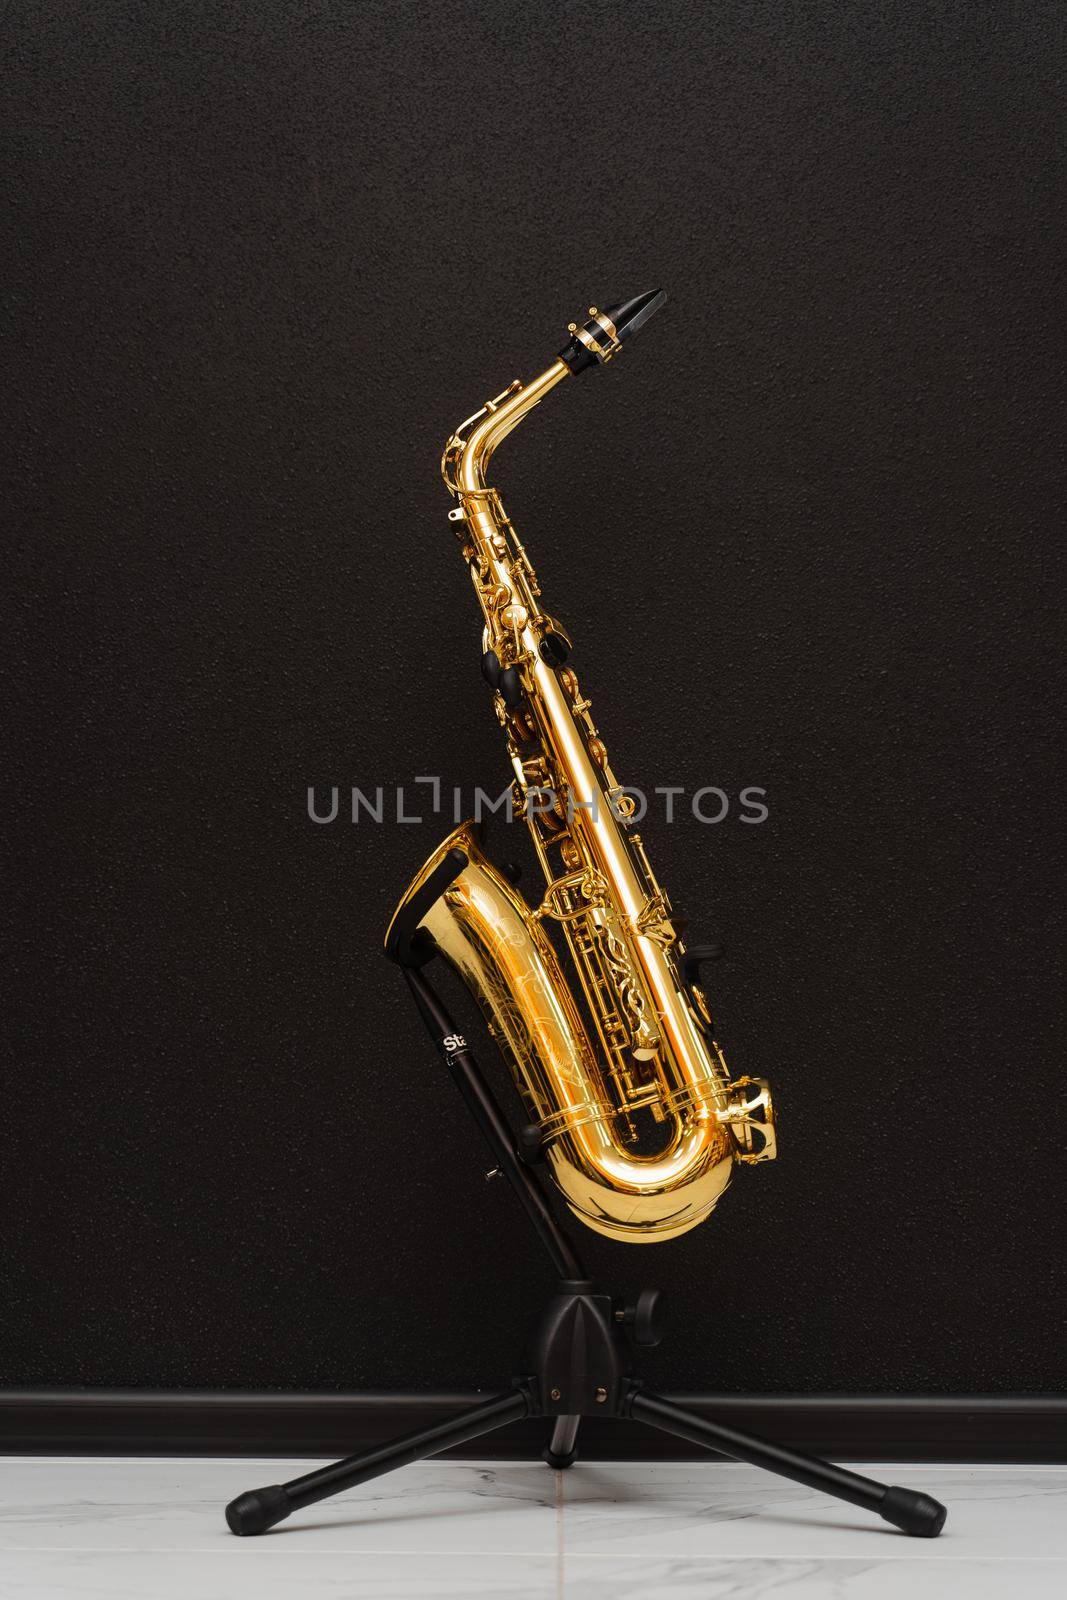 Sax musical instrument for play jazz. Saxophone musician instrument on stand on black background